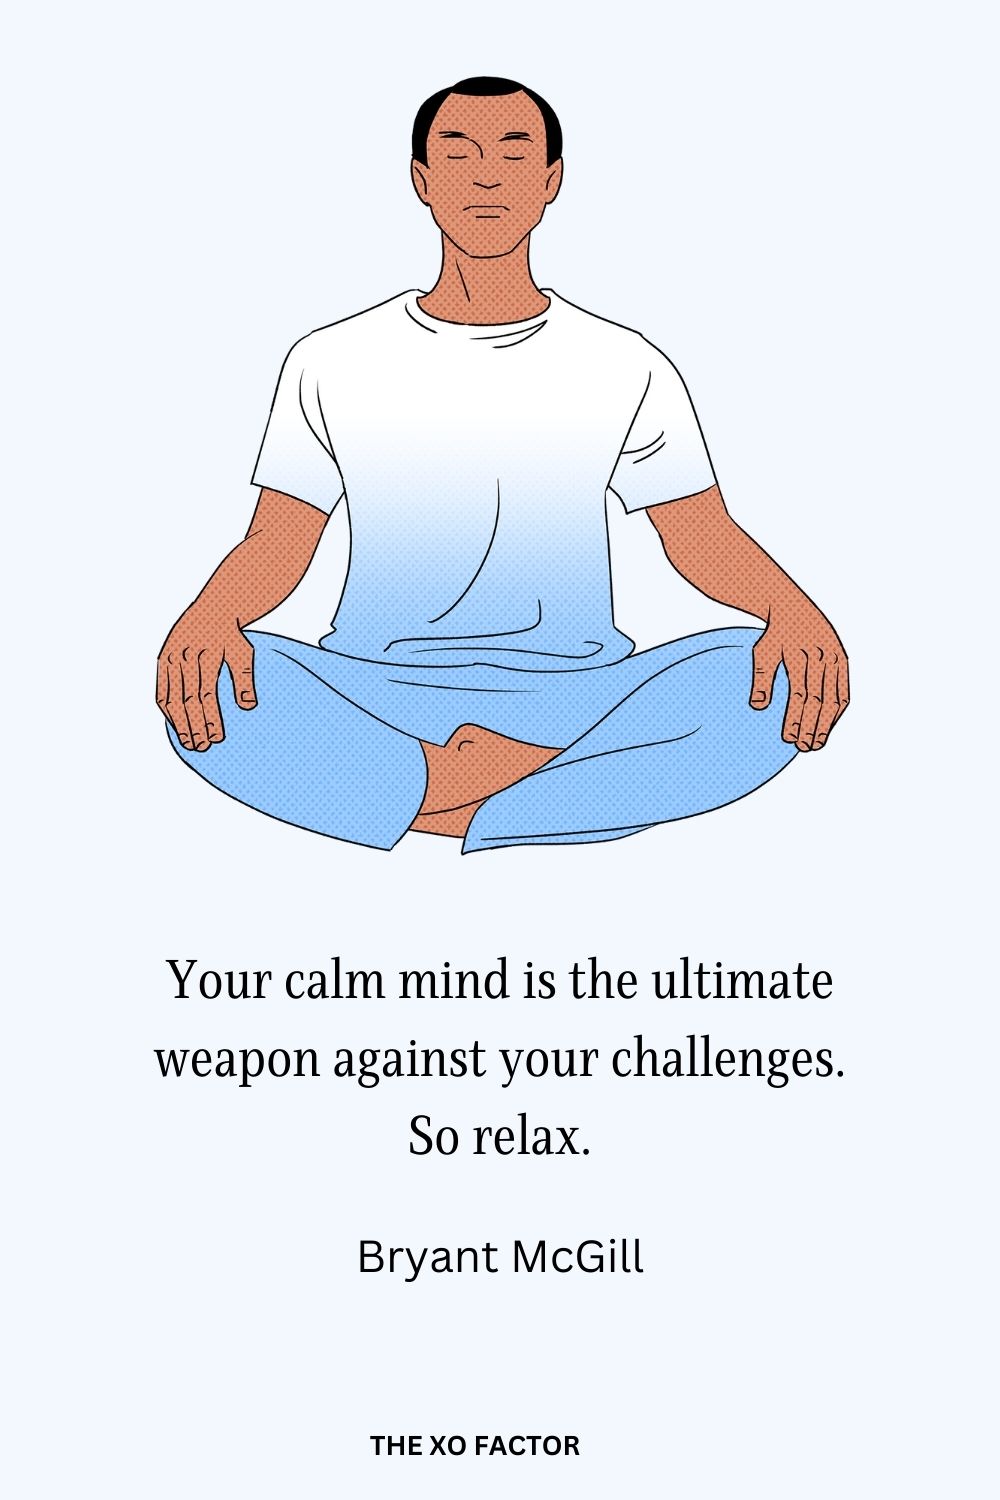 Your calm mind is the ultimate weapon against your challenges. So relax.
Bryant McGill